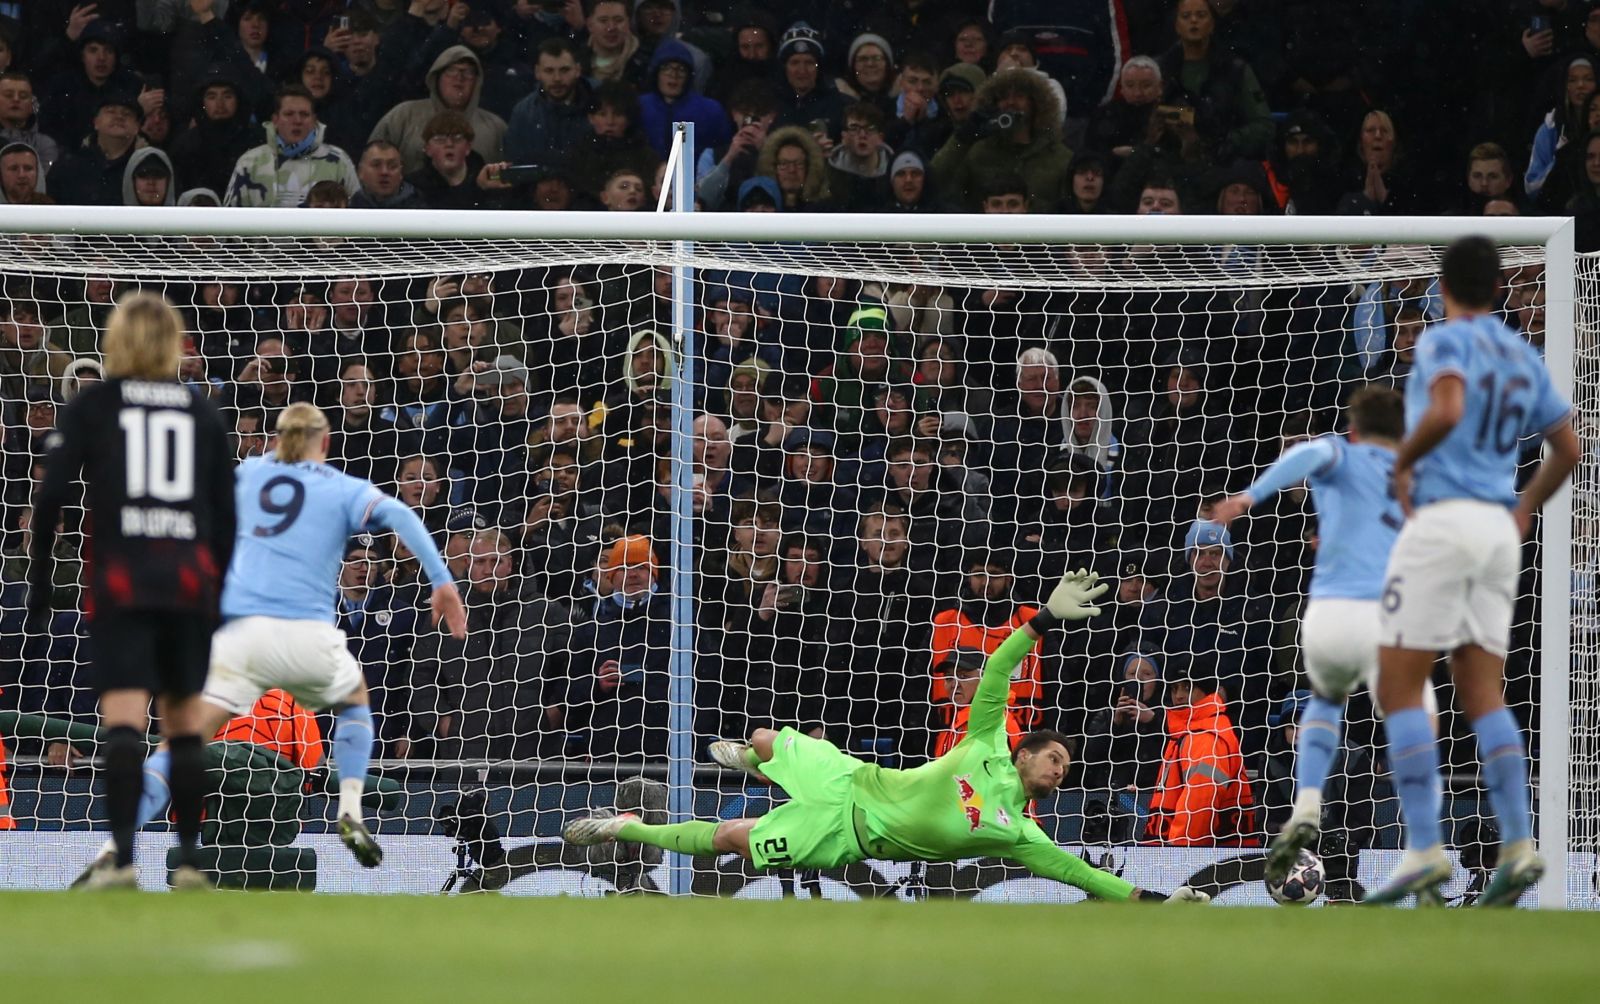 epa10522902 Manchester City's Erling Haaland scores the 1-0 lead past RB Leipzig's goalkeeper Janis Blaswich during the UEFA Champions League Round of 16, 2nd leg match between Manchester City and RB Leipzig in Manchester, Britain, 14 March 2023.  EPA/Adam Vaughan